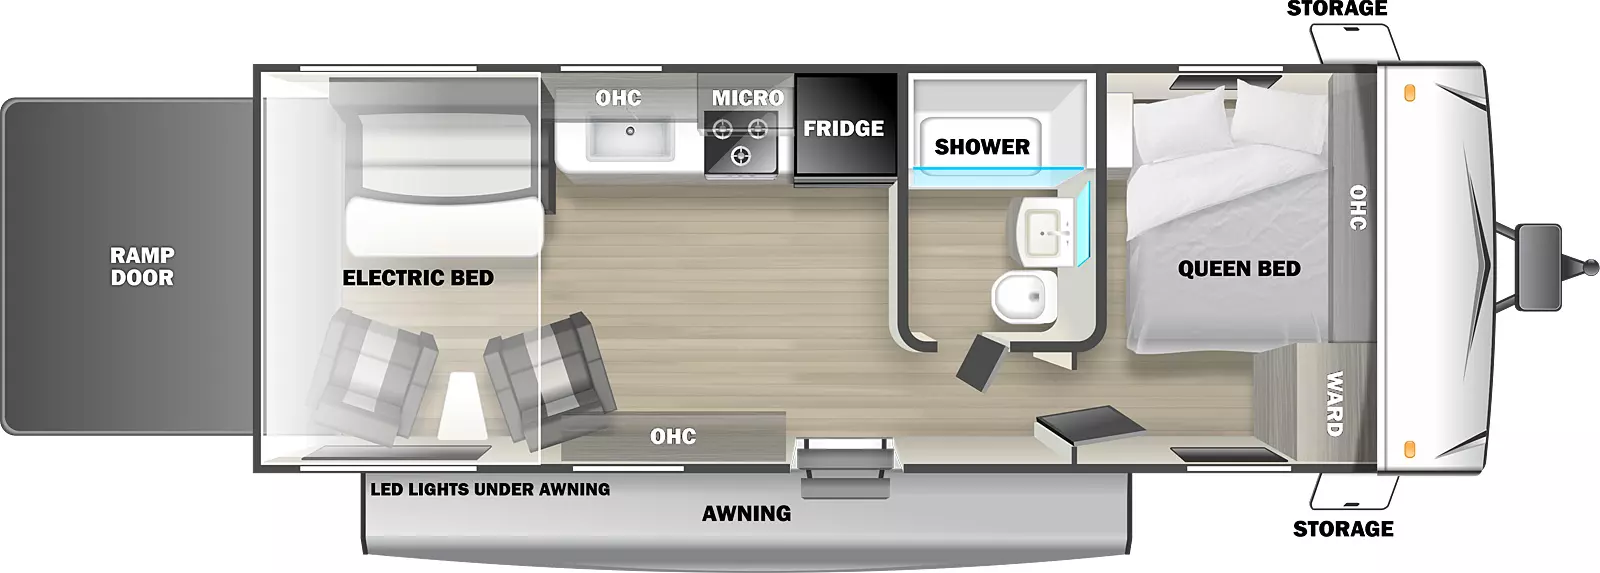 The Stealth FQ2113 is a toy hauler trailer with one entry door, a rear ramp door, front pass-through storage, and awning on the exterior. Inside layout front to back: front bedroom with side facing queen bed, cabinets mounted above, a night stand next at the head of the bed, and a wardrobe cabinet at the foot of the bed; off-door side aisle bathroom with shower, sink, and commode; off-door side kitchen includes a refrigerator, stovetop with oven, and sink, with cabinets and a microwave oven mounted overhead; door side overhead cabinets and entry; rear flip sofa with half dinette table and a pair of upholstered chairs with a small table in between with an electric bed above.